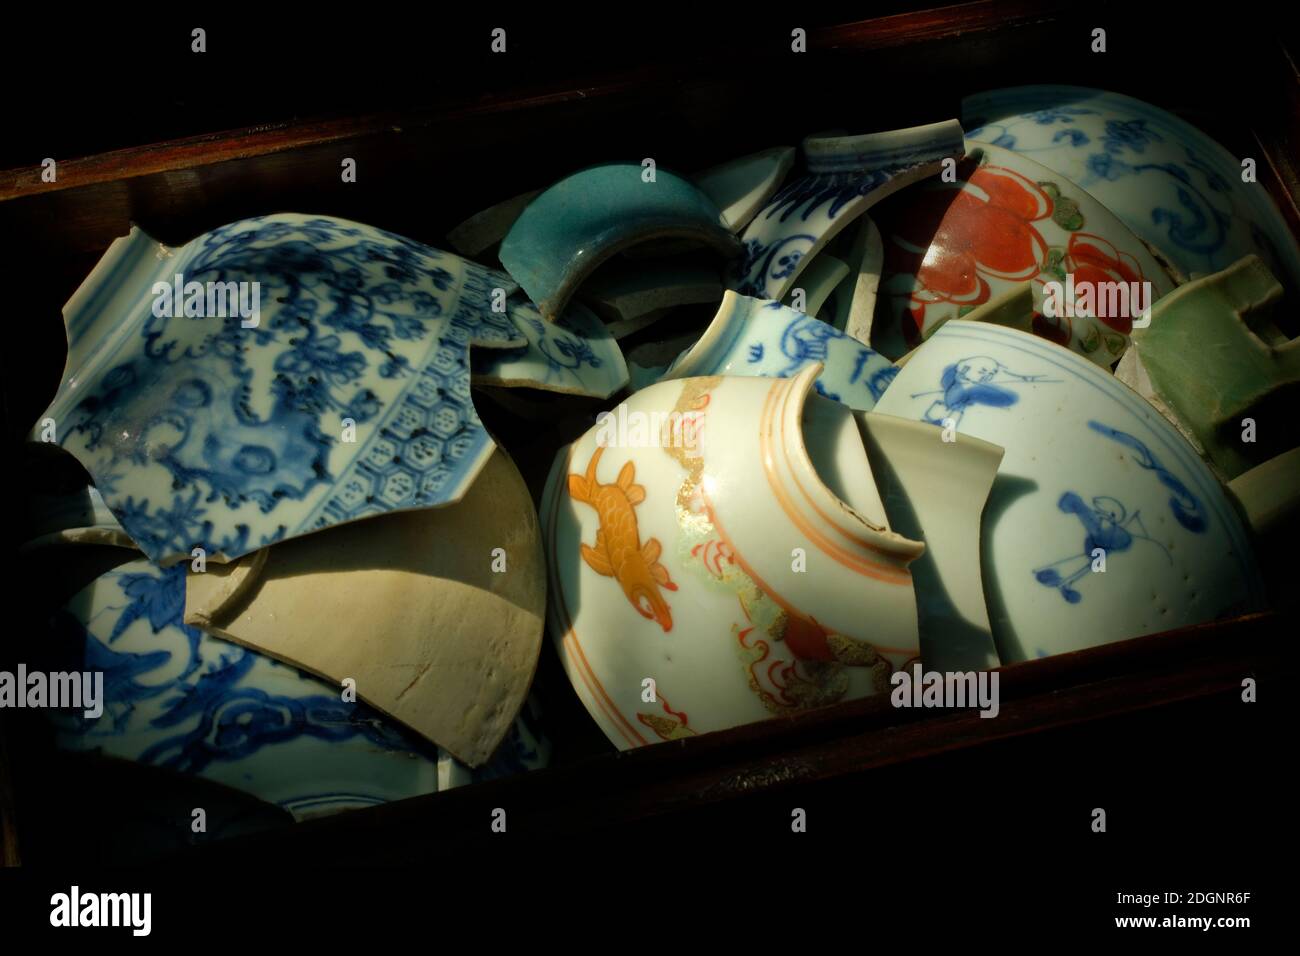 https://c8.alamy.com/comp/2DGNR6F/personal-collection-of-ancient-chinese-ceramic-shards-from-the-construction-sites-in-beijing-china-mainly-that-of-the-ming-and-qing-dynasty-2DGNR6F.jpg